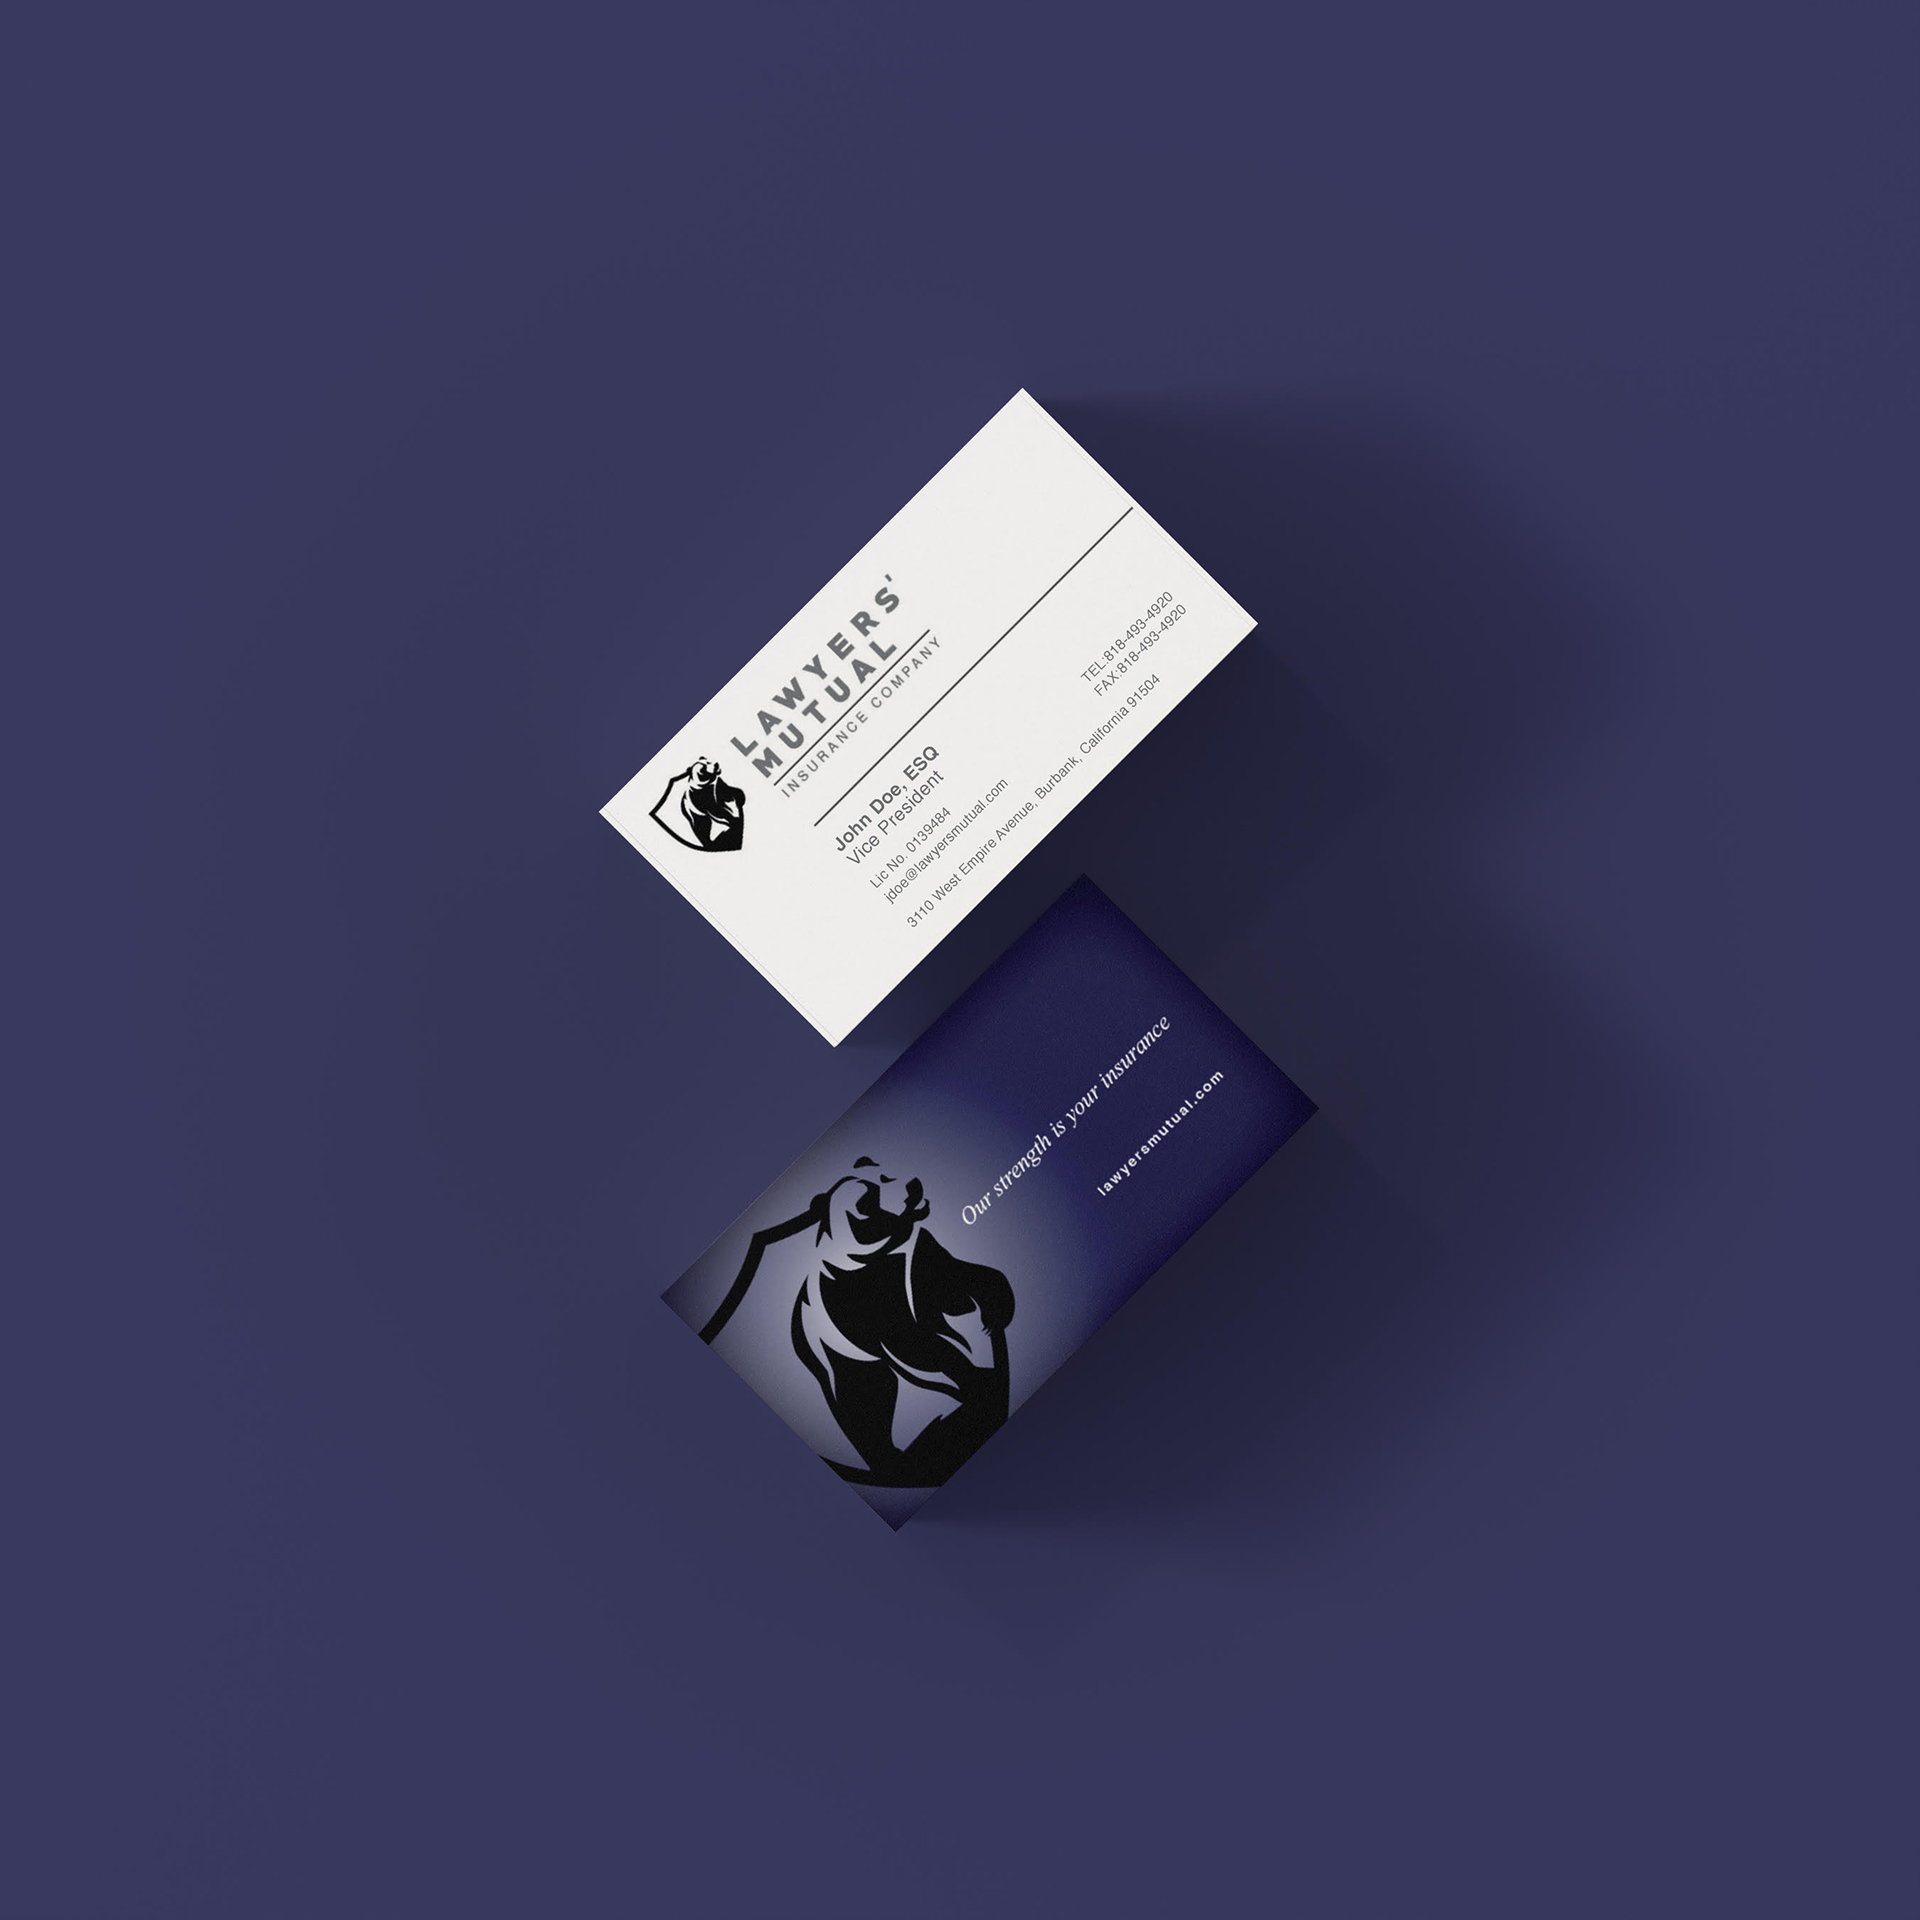 lmic business card example on purple background